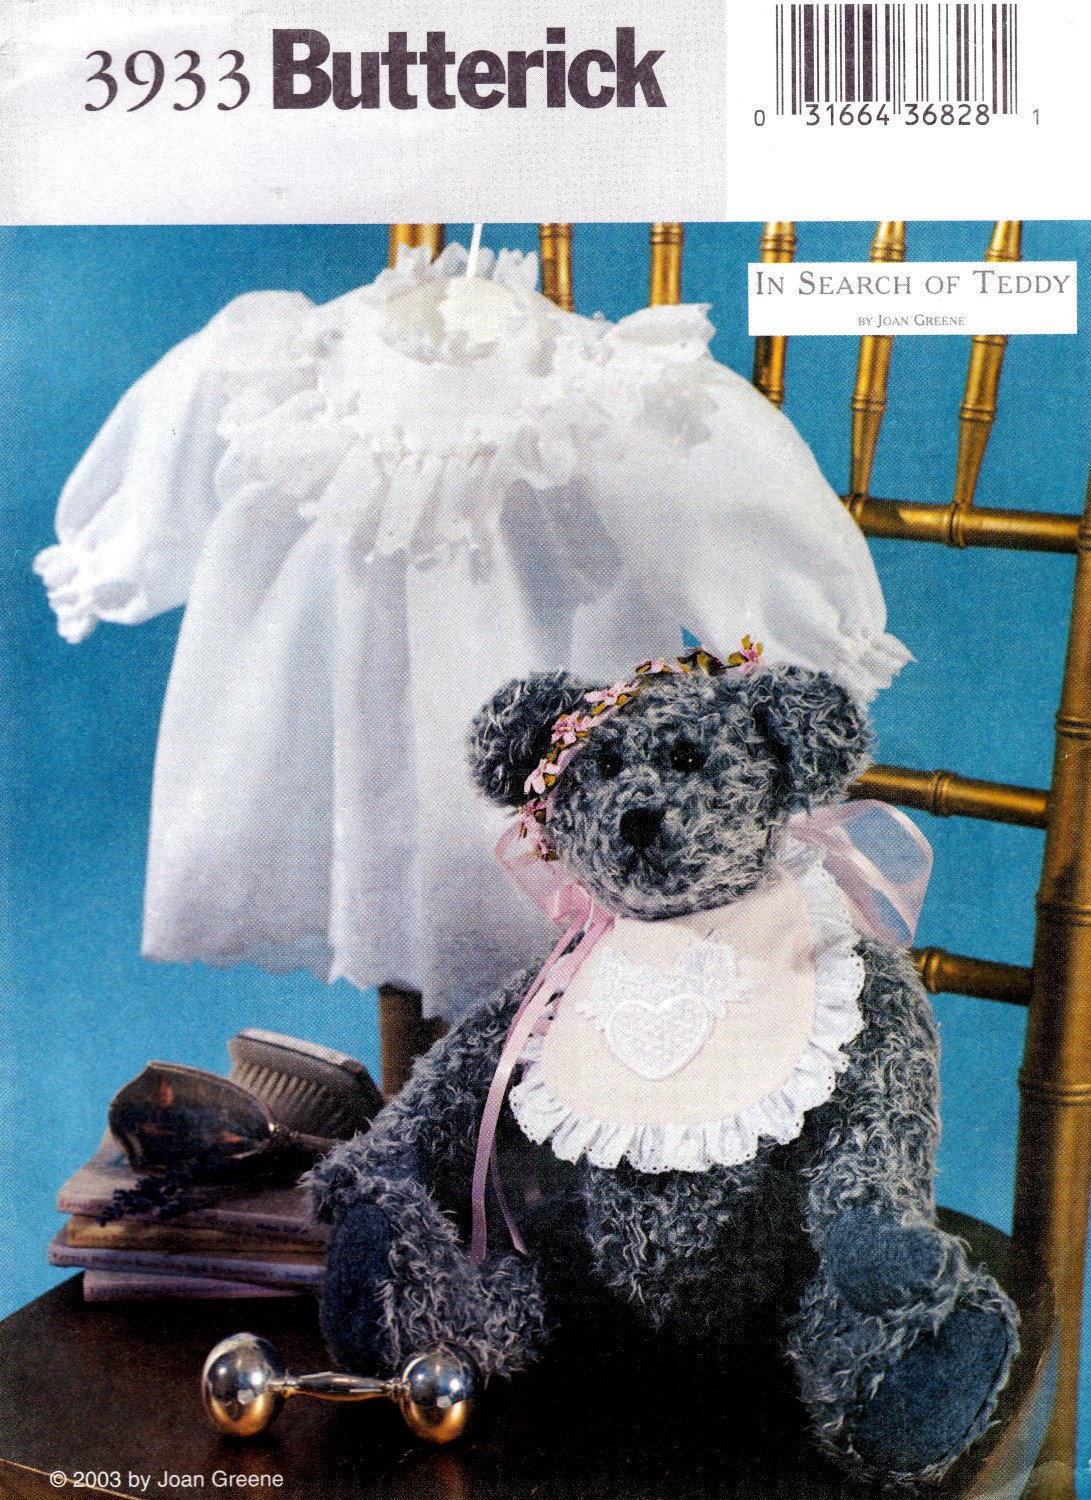 Butterick 3933 Plush Victorian Stuffed Bear and Outfit Crafts Sewing Pattern Size OSZ